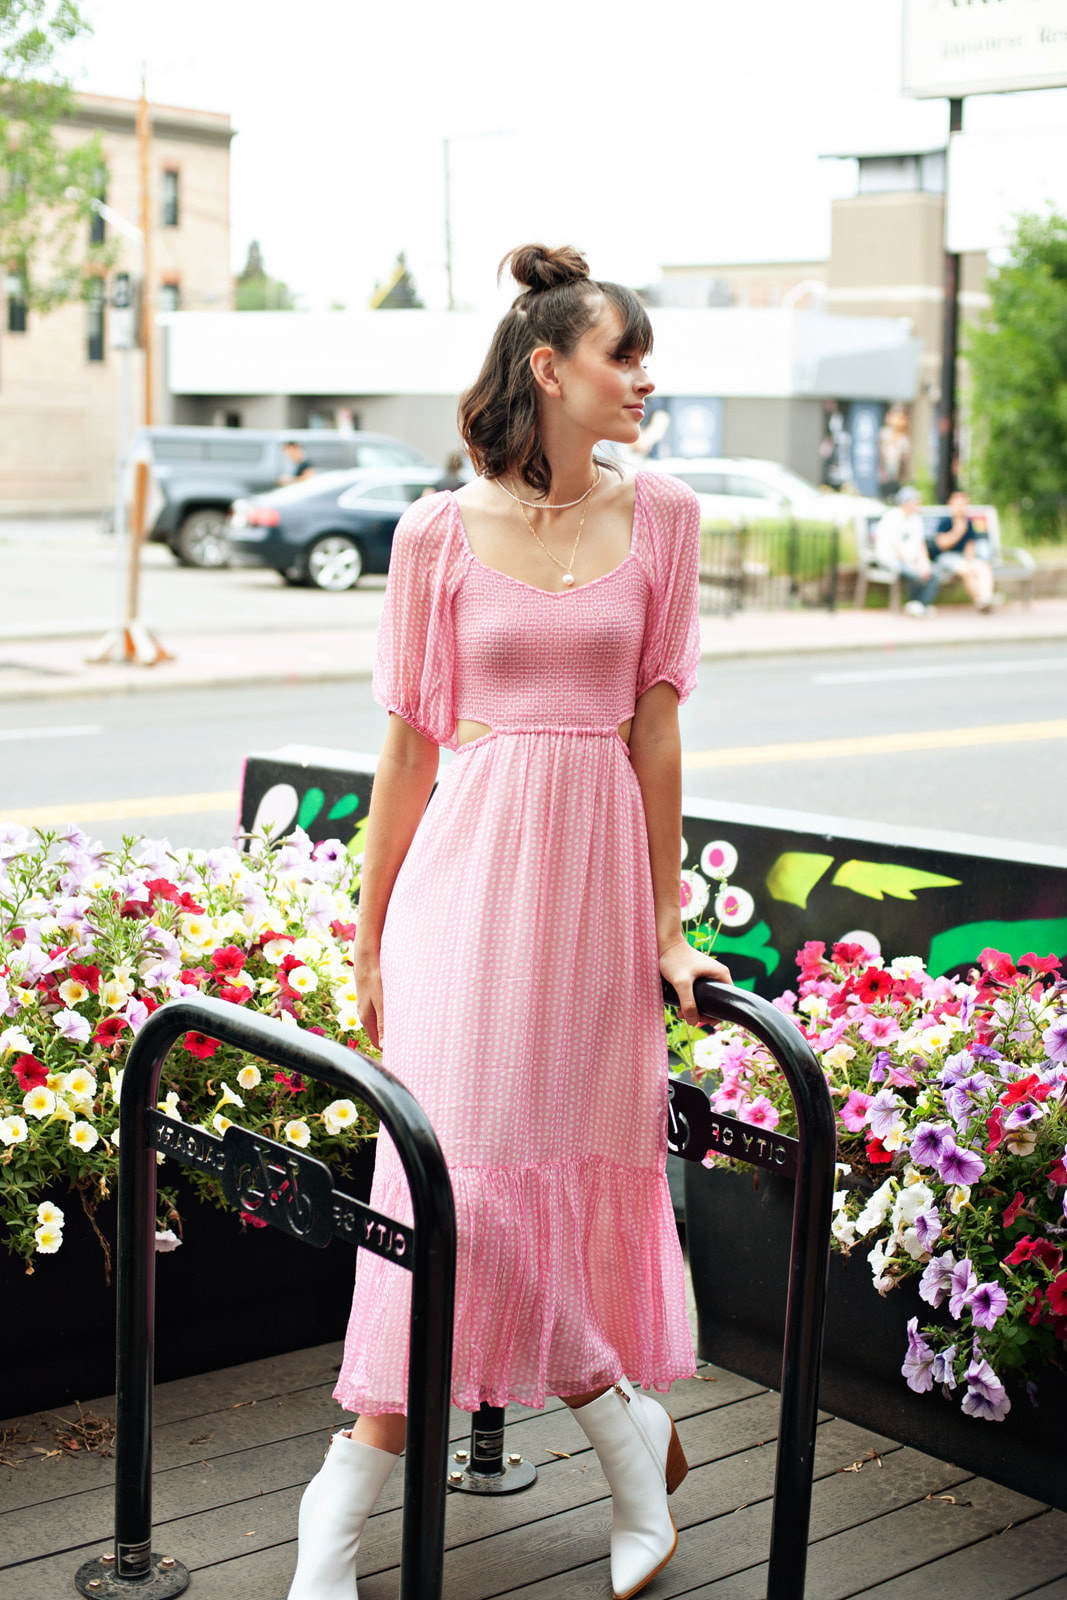 SALTWATER LUXE SHARICE MIDI DRESS IN HOT PINK